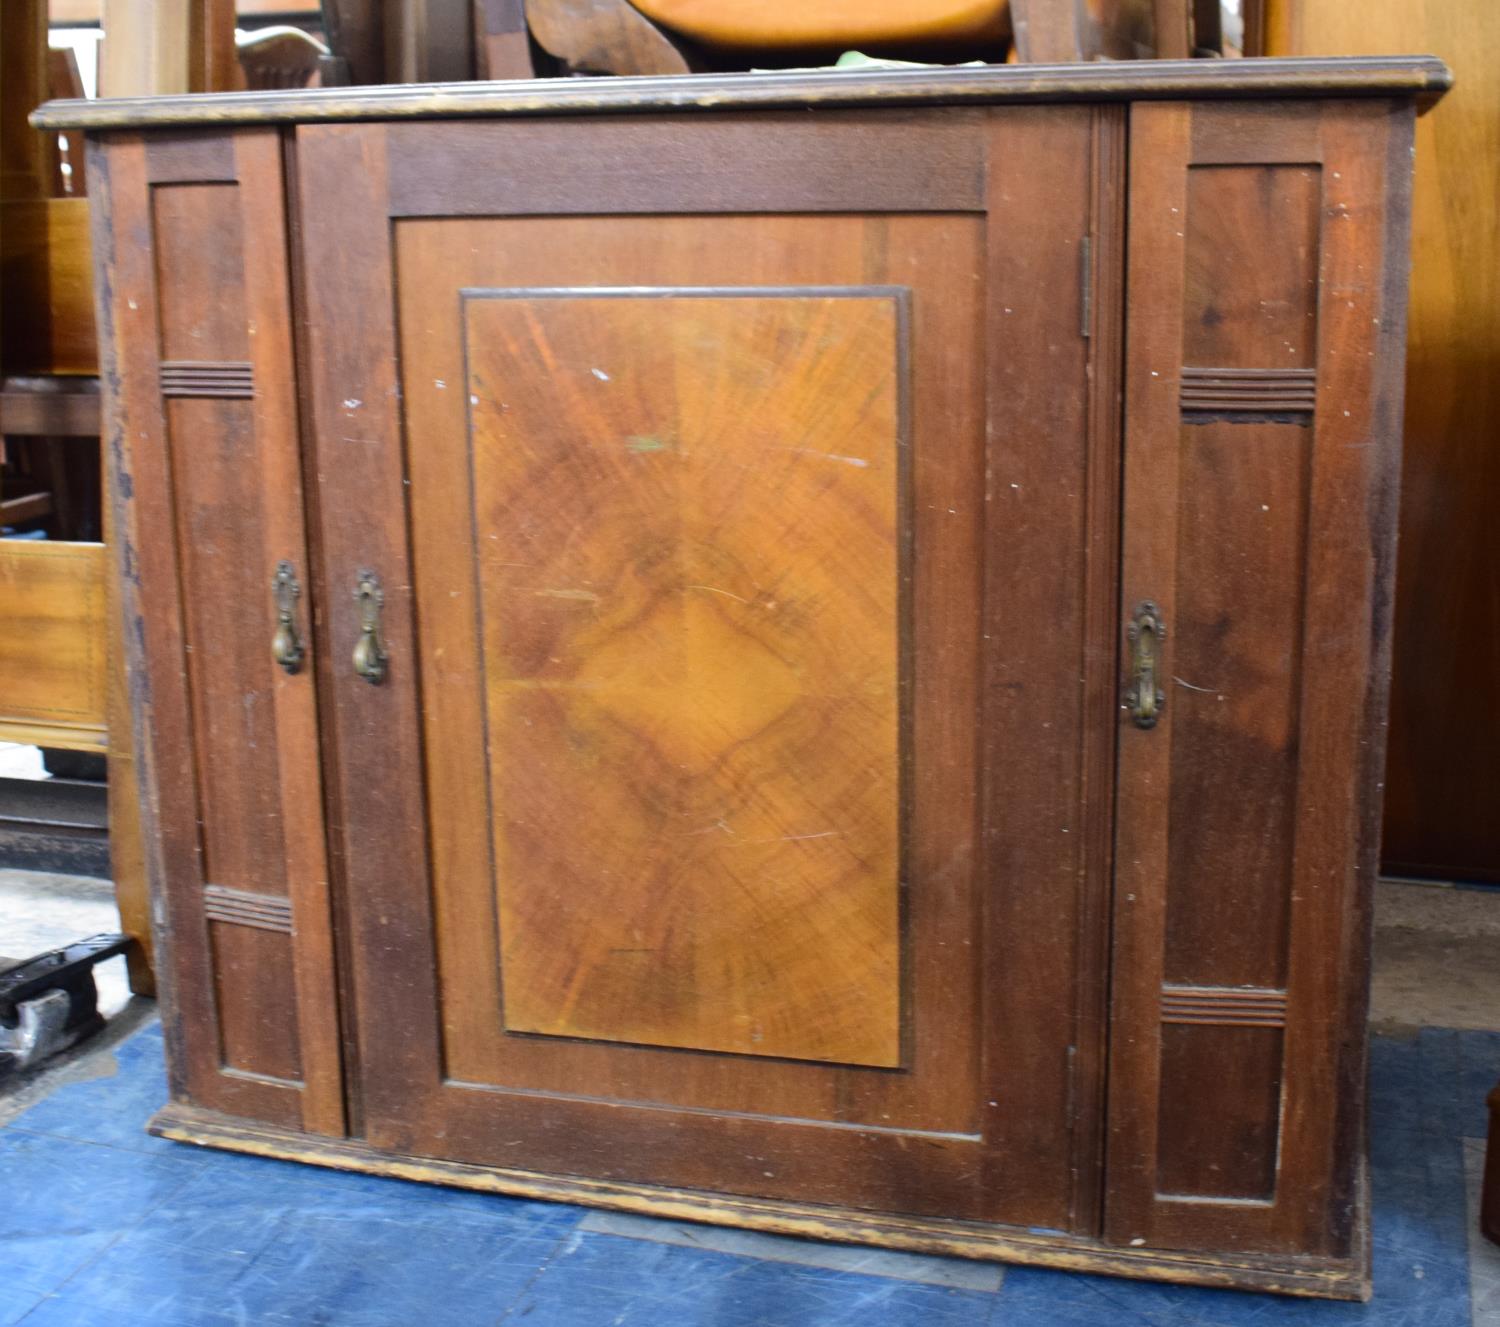 A Cabinet Containing Treadle Frister and Rossmann Sewing Machine, Locked and No Key, 90cm Wide